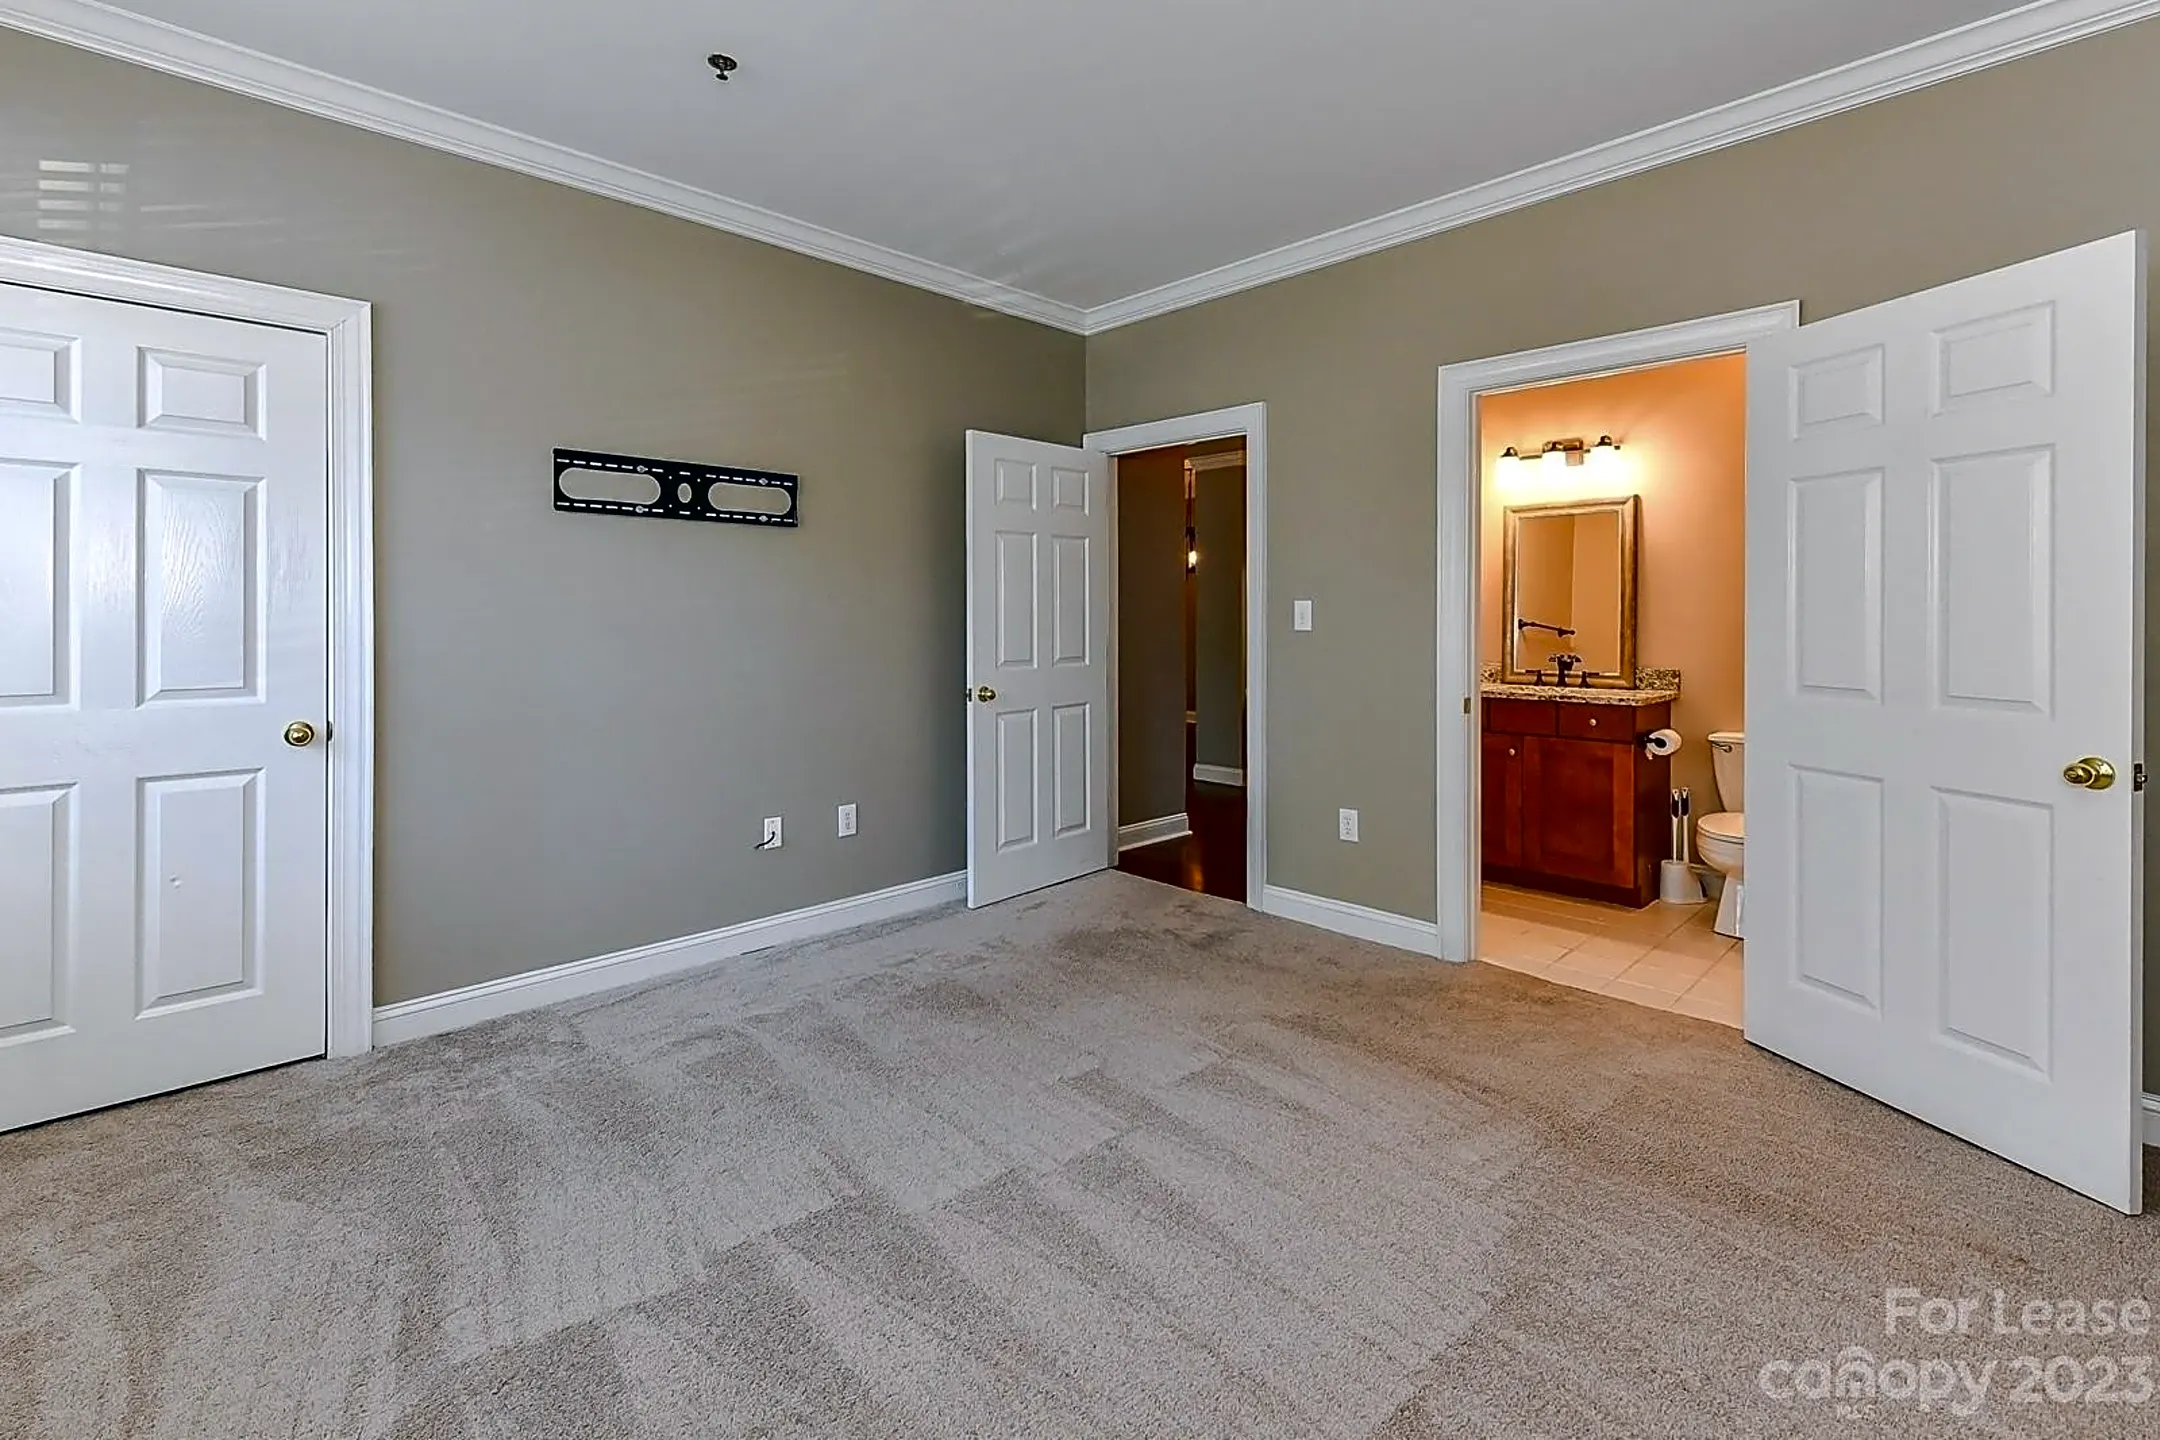 Bedroom - 5609 Fairview Rd #1 - Charlotte, NC